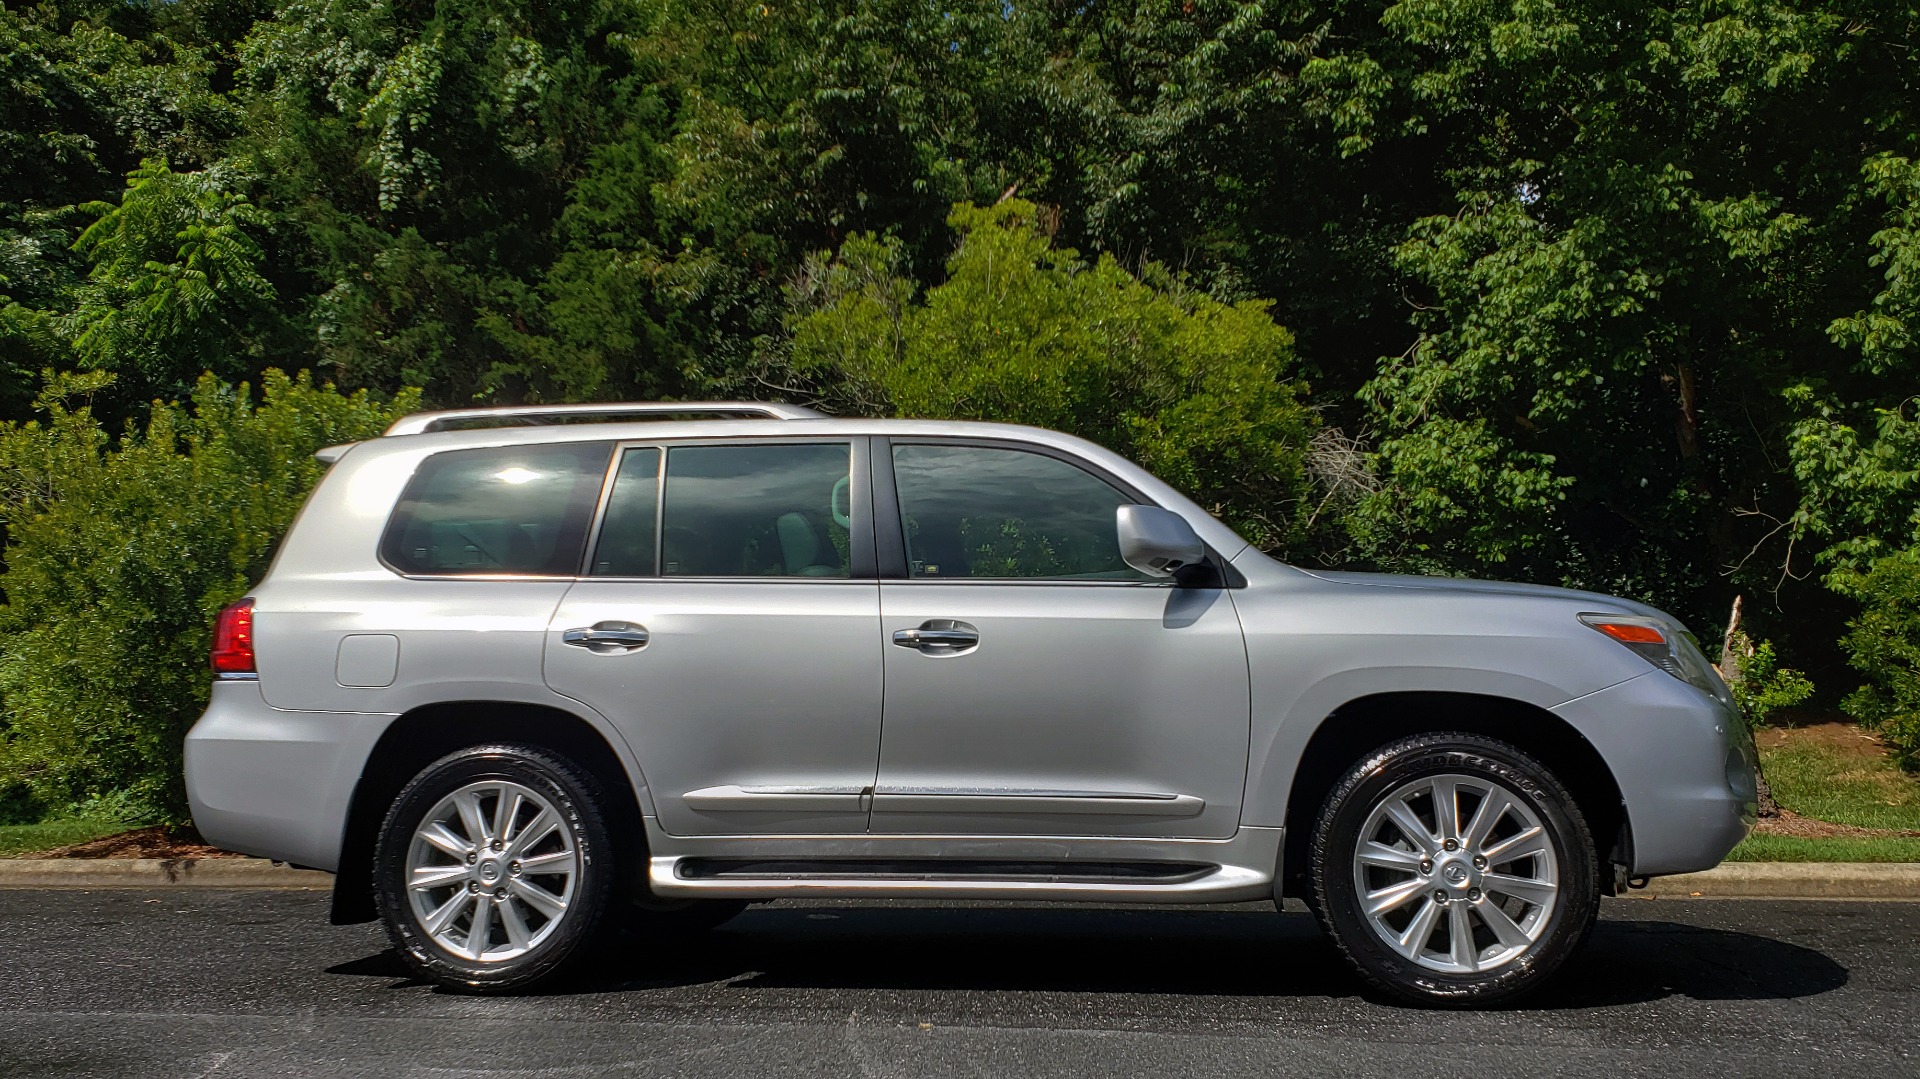 Used 2008 Lexus LX 570 4WD NAV / TECHNOLOGY PKG / 3-ROW / SUNROOF / REARVIEW for sale Sold at Formula Imports in Charlotte NC 28227 5